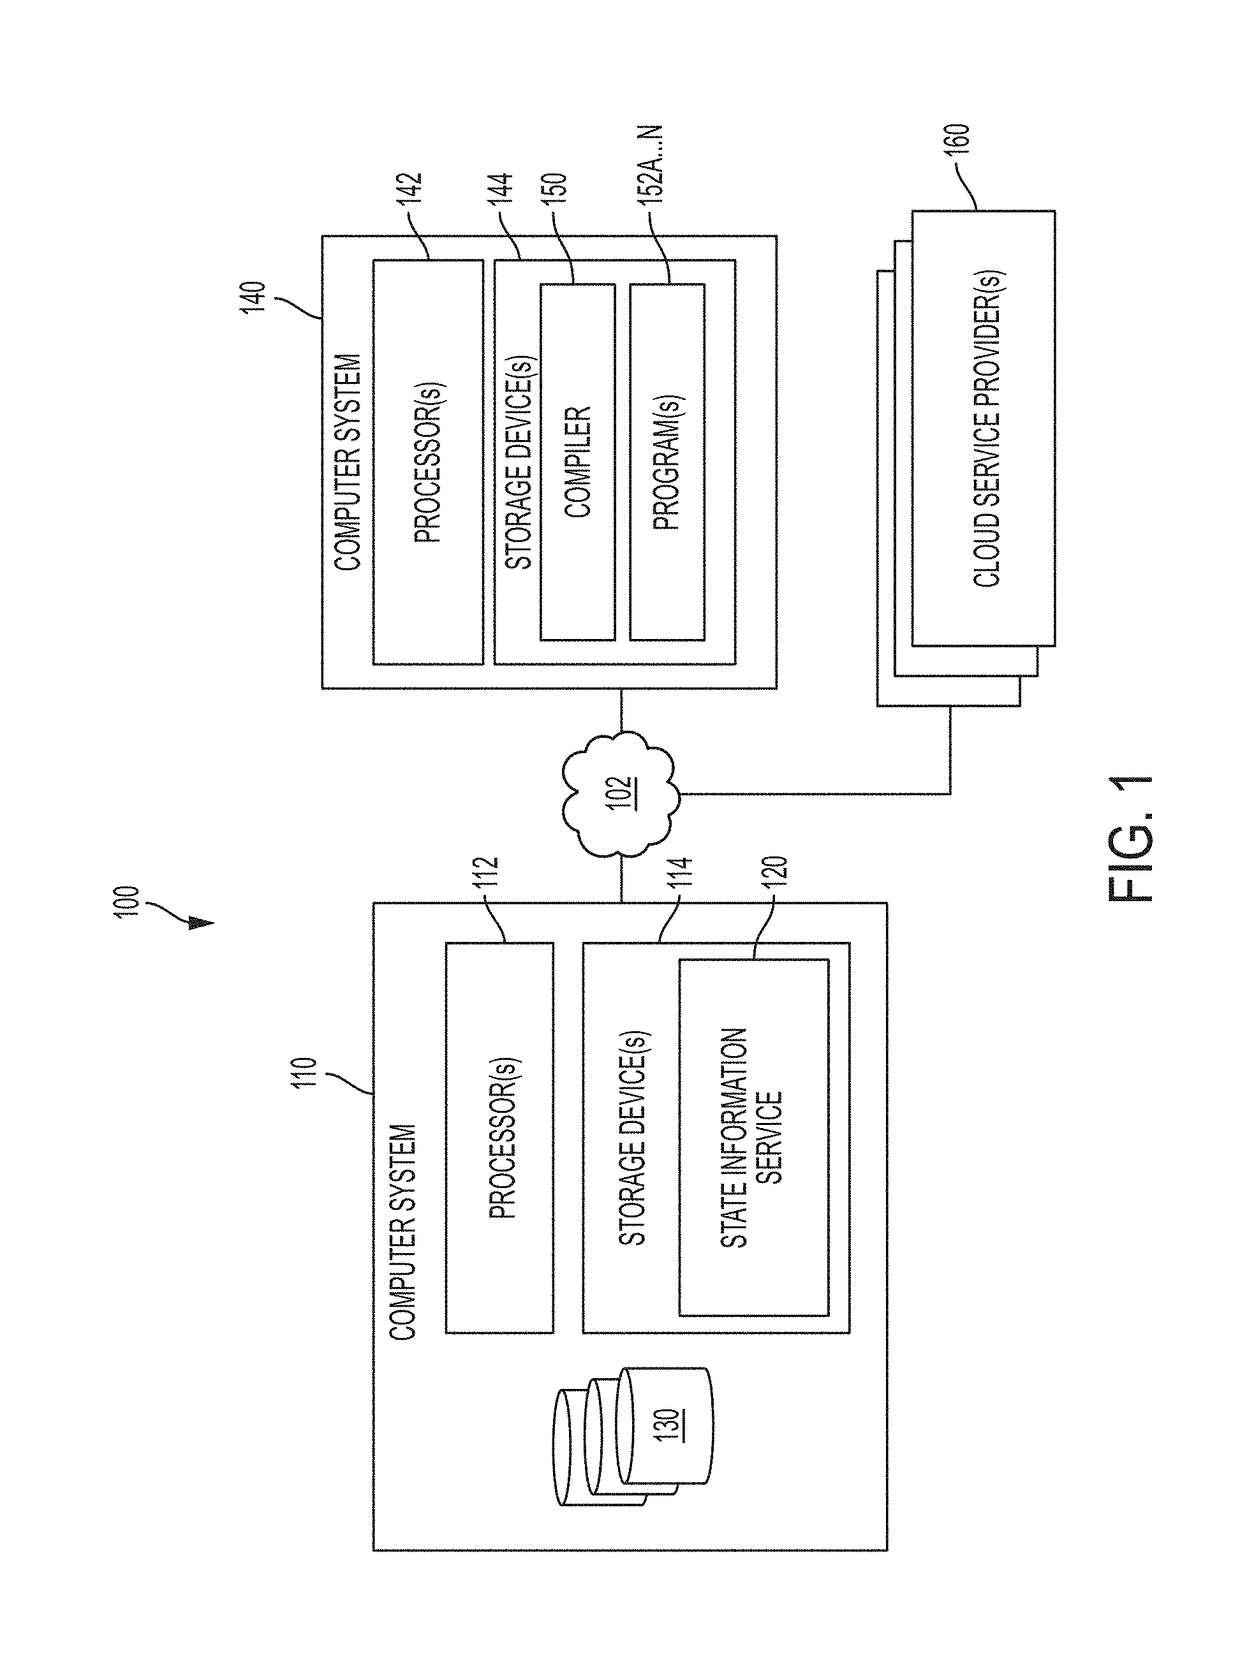 System and method for providing cloud operating system verifications for a domain-specific language for cloud services infrastructure